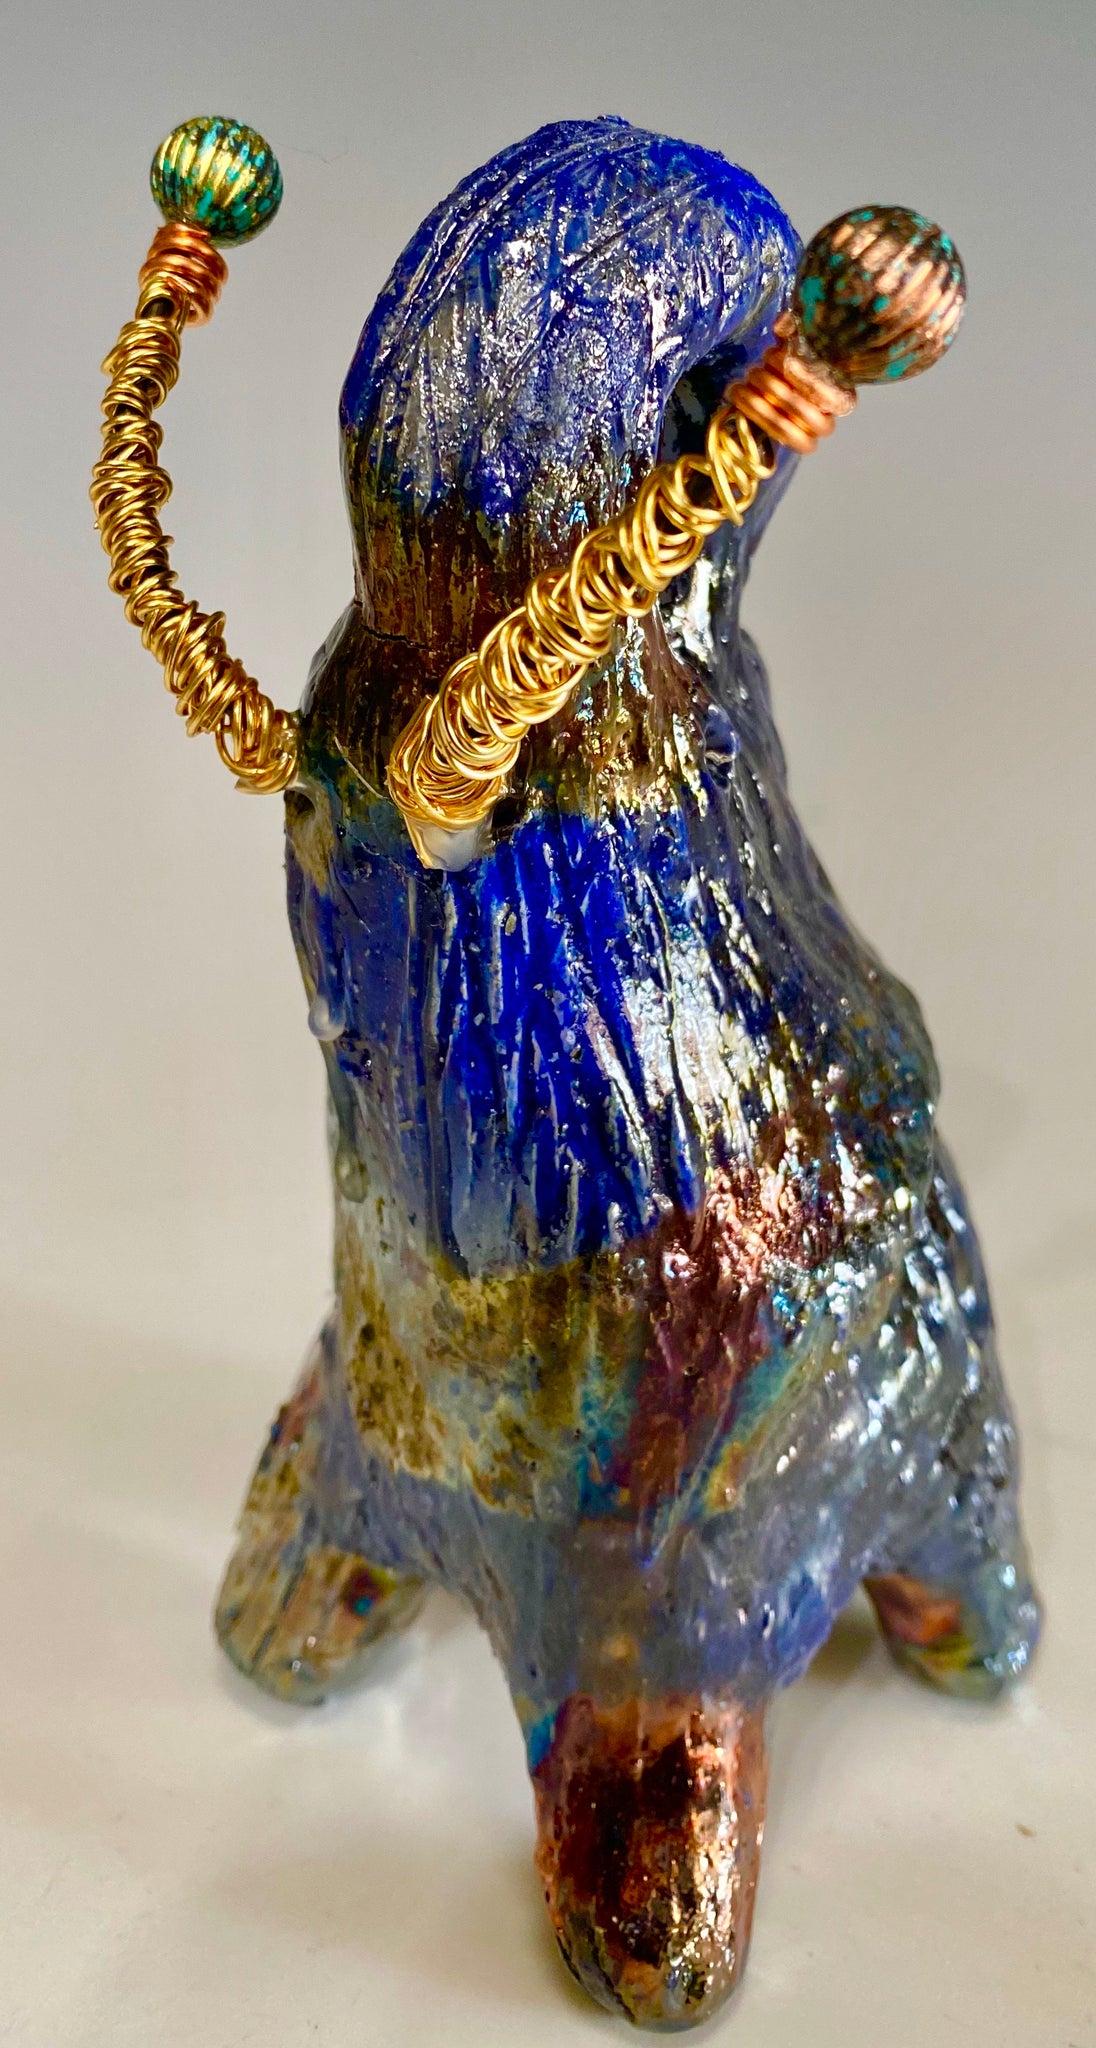 "Elephants are one of my favorite animals to create. They are so majestic" This raku fired elephant stands 6" x 3" x 5" and weighs 11 ounces. She has beaded tusks and a textured copper body. Nice!